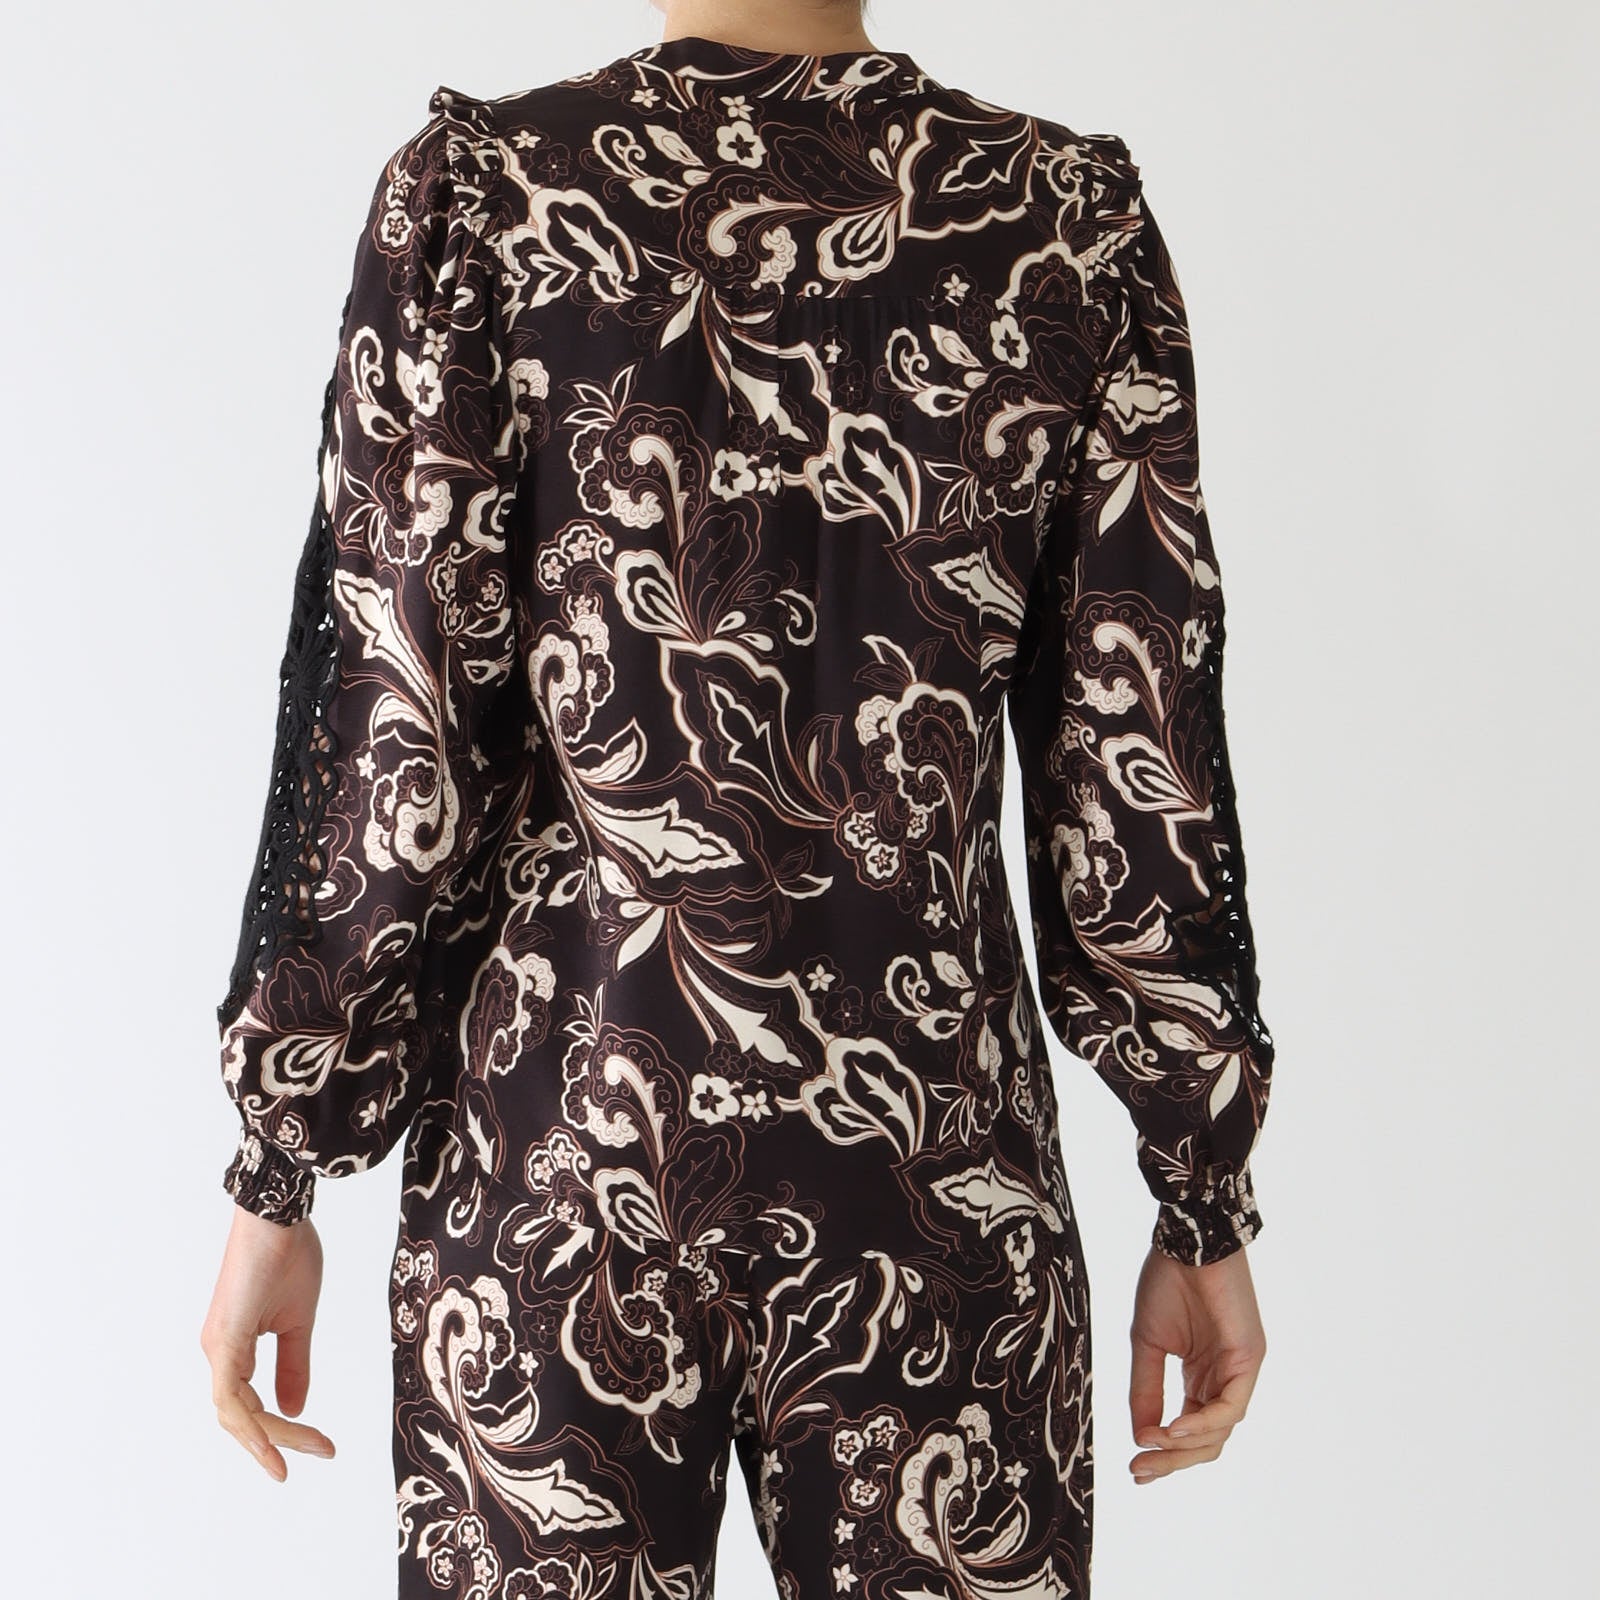 Lise Black Paisley Print Blouse With Lace Inserts